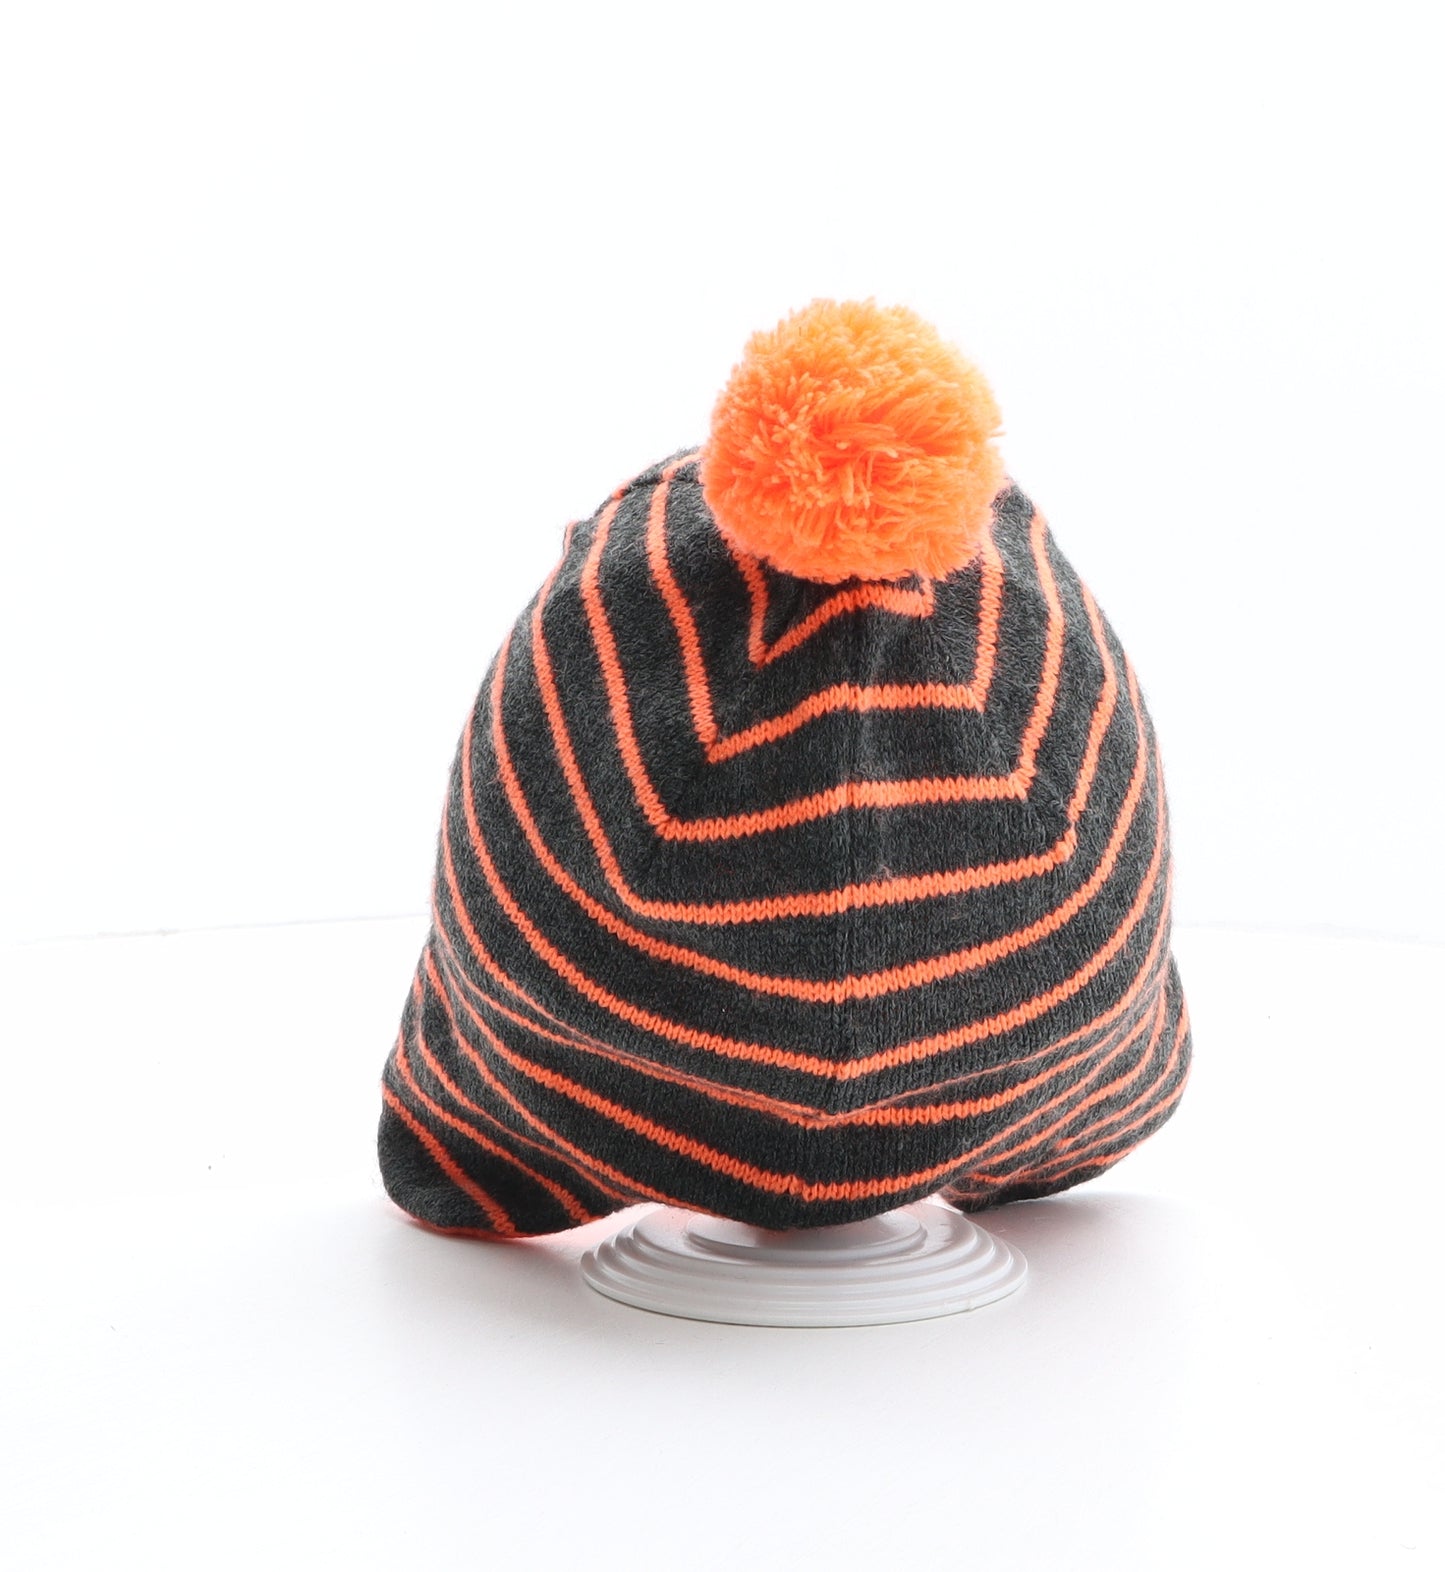 Marks and Spencer Girls Multicoloured Striped Acrylic Winter Hat One Size - Size 18-36 months, Pom Pom